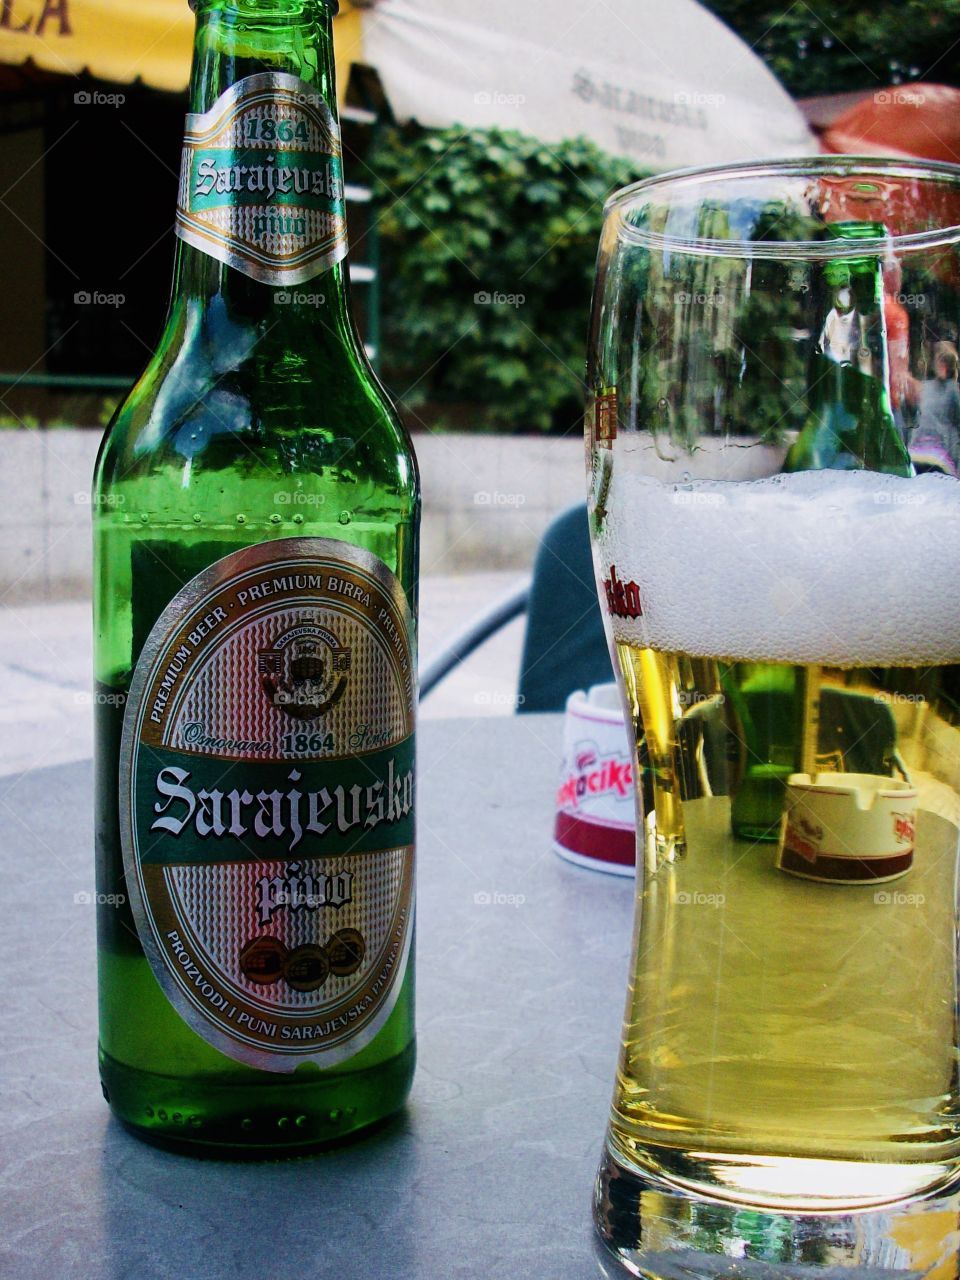 A glass and Bottle of Sarajevsko beer on a Café table